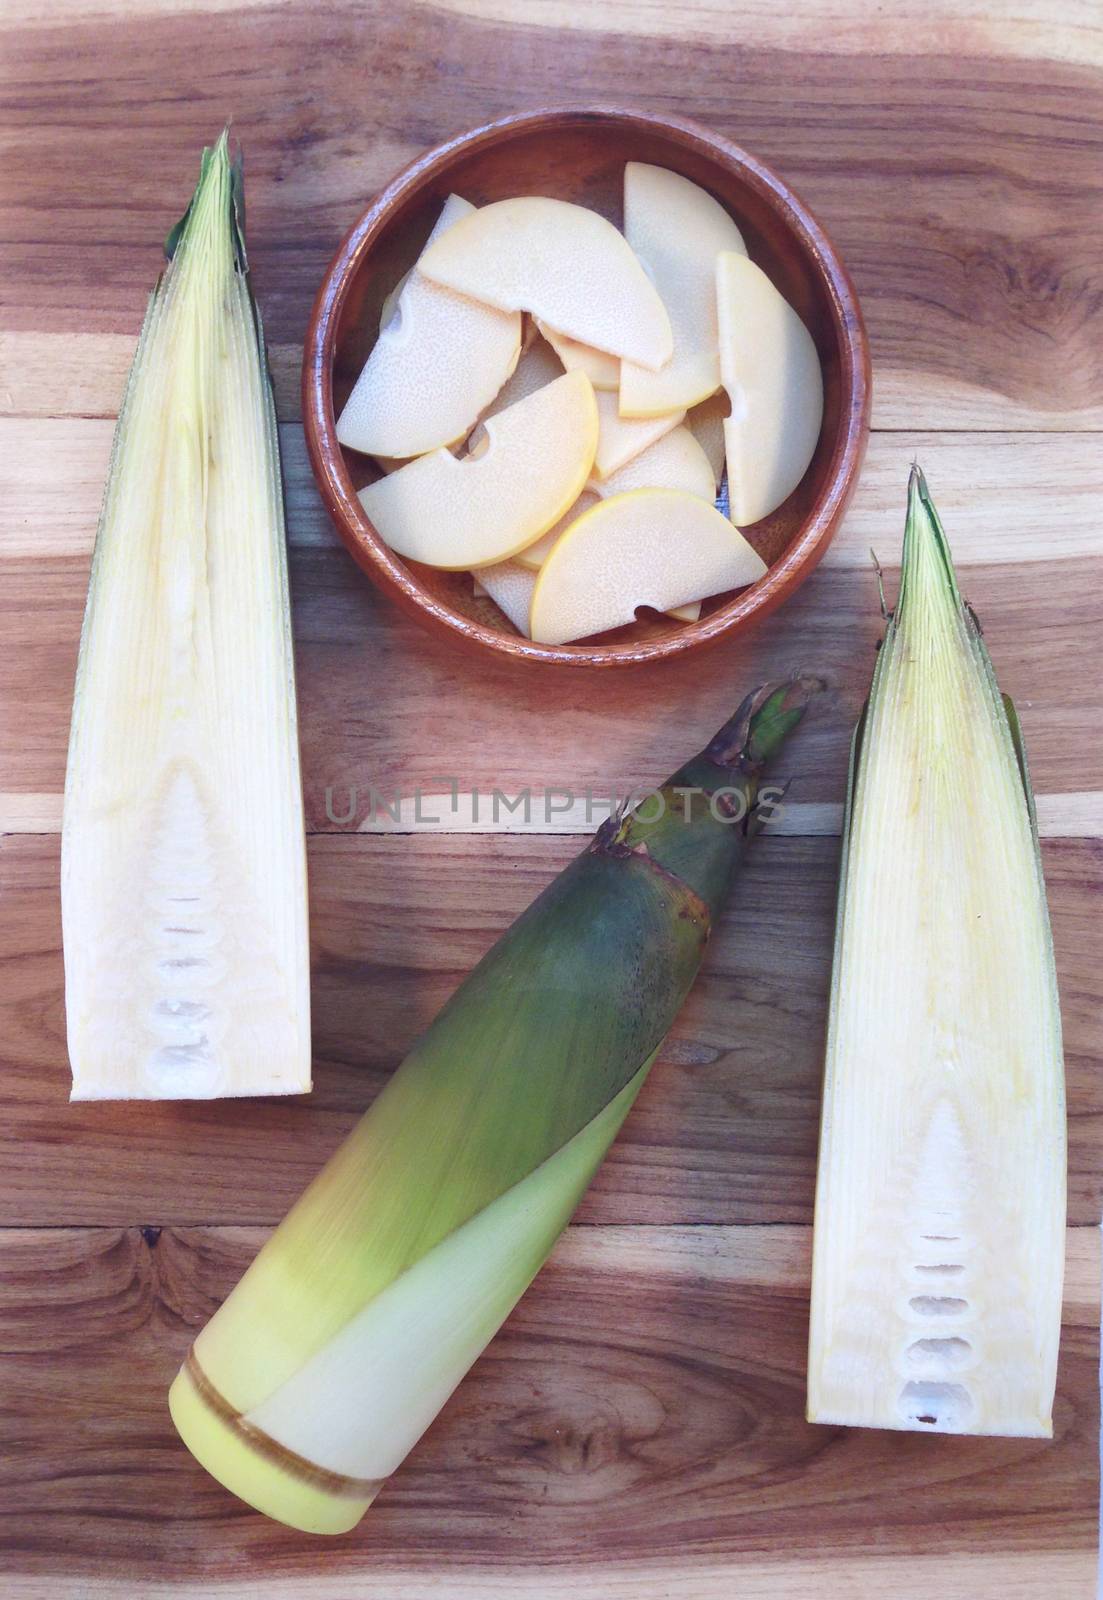 Bamboo shoots and Bamboo shoots slices in wooden bowl on wooden  by Bowonpat